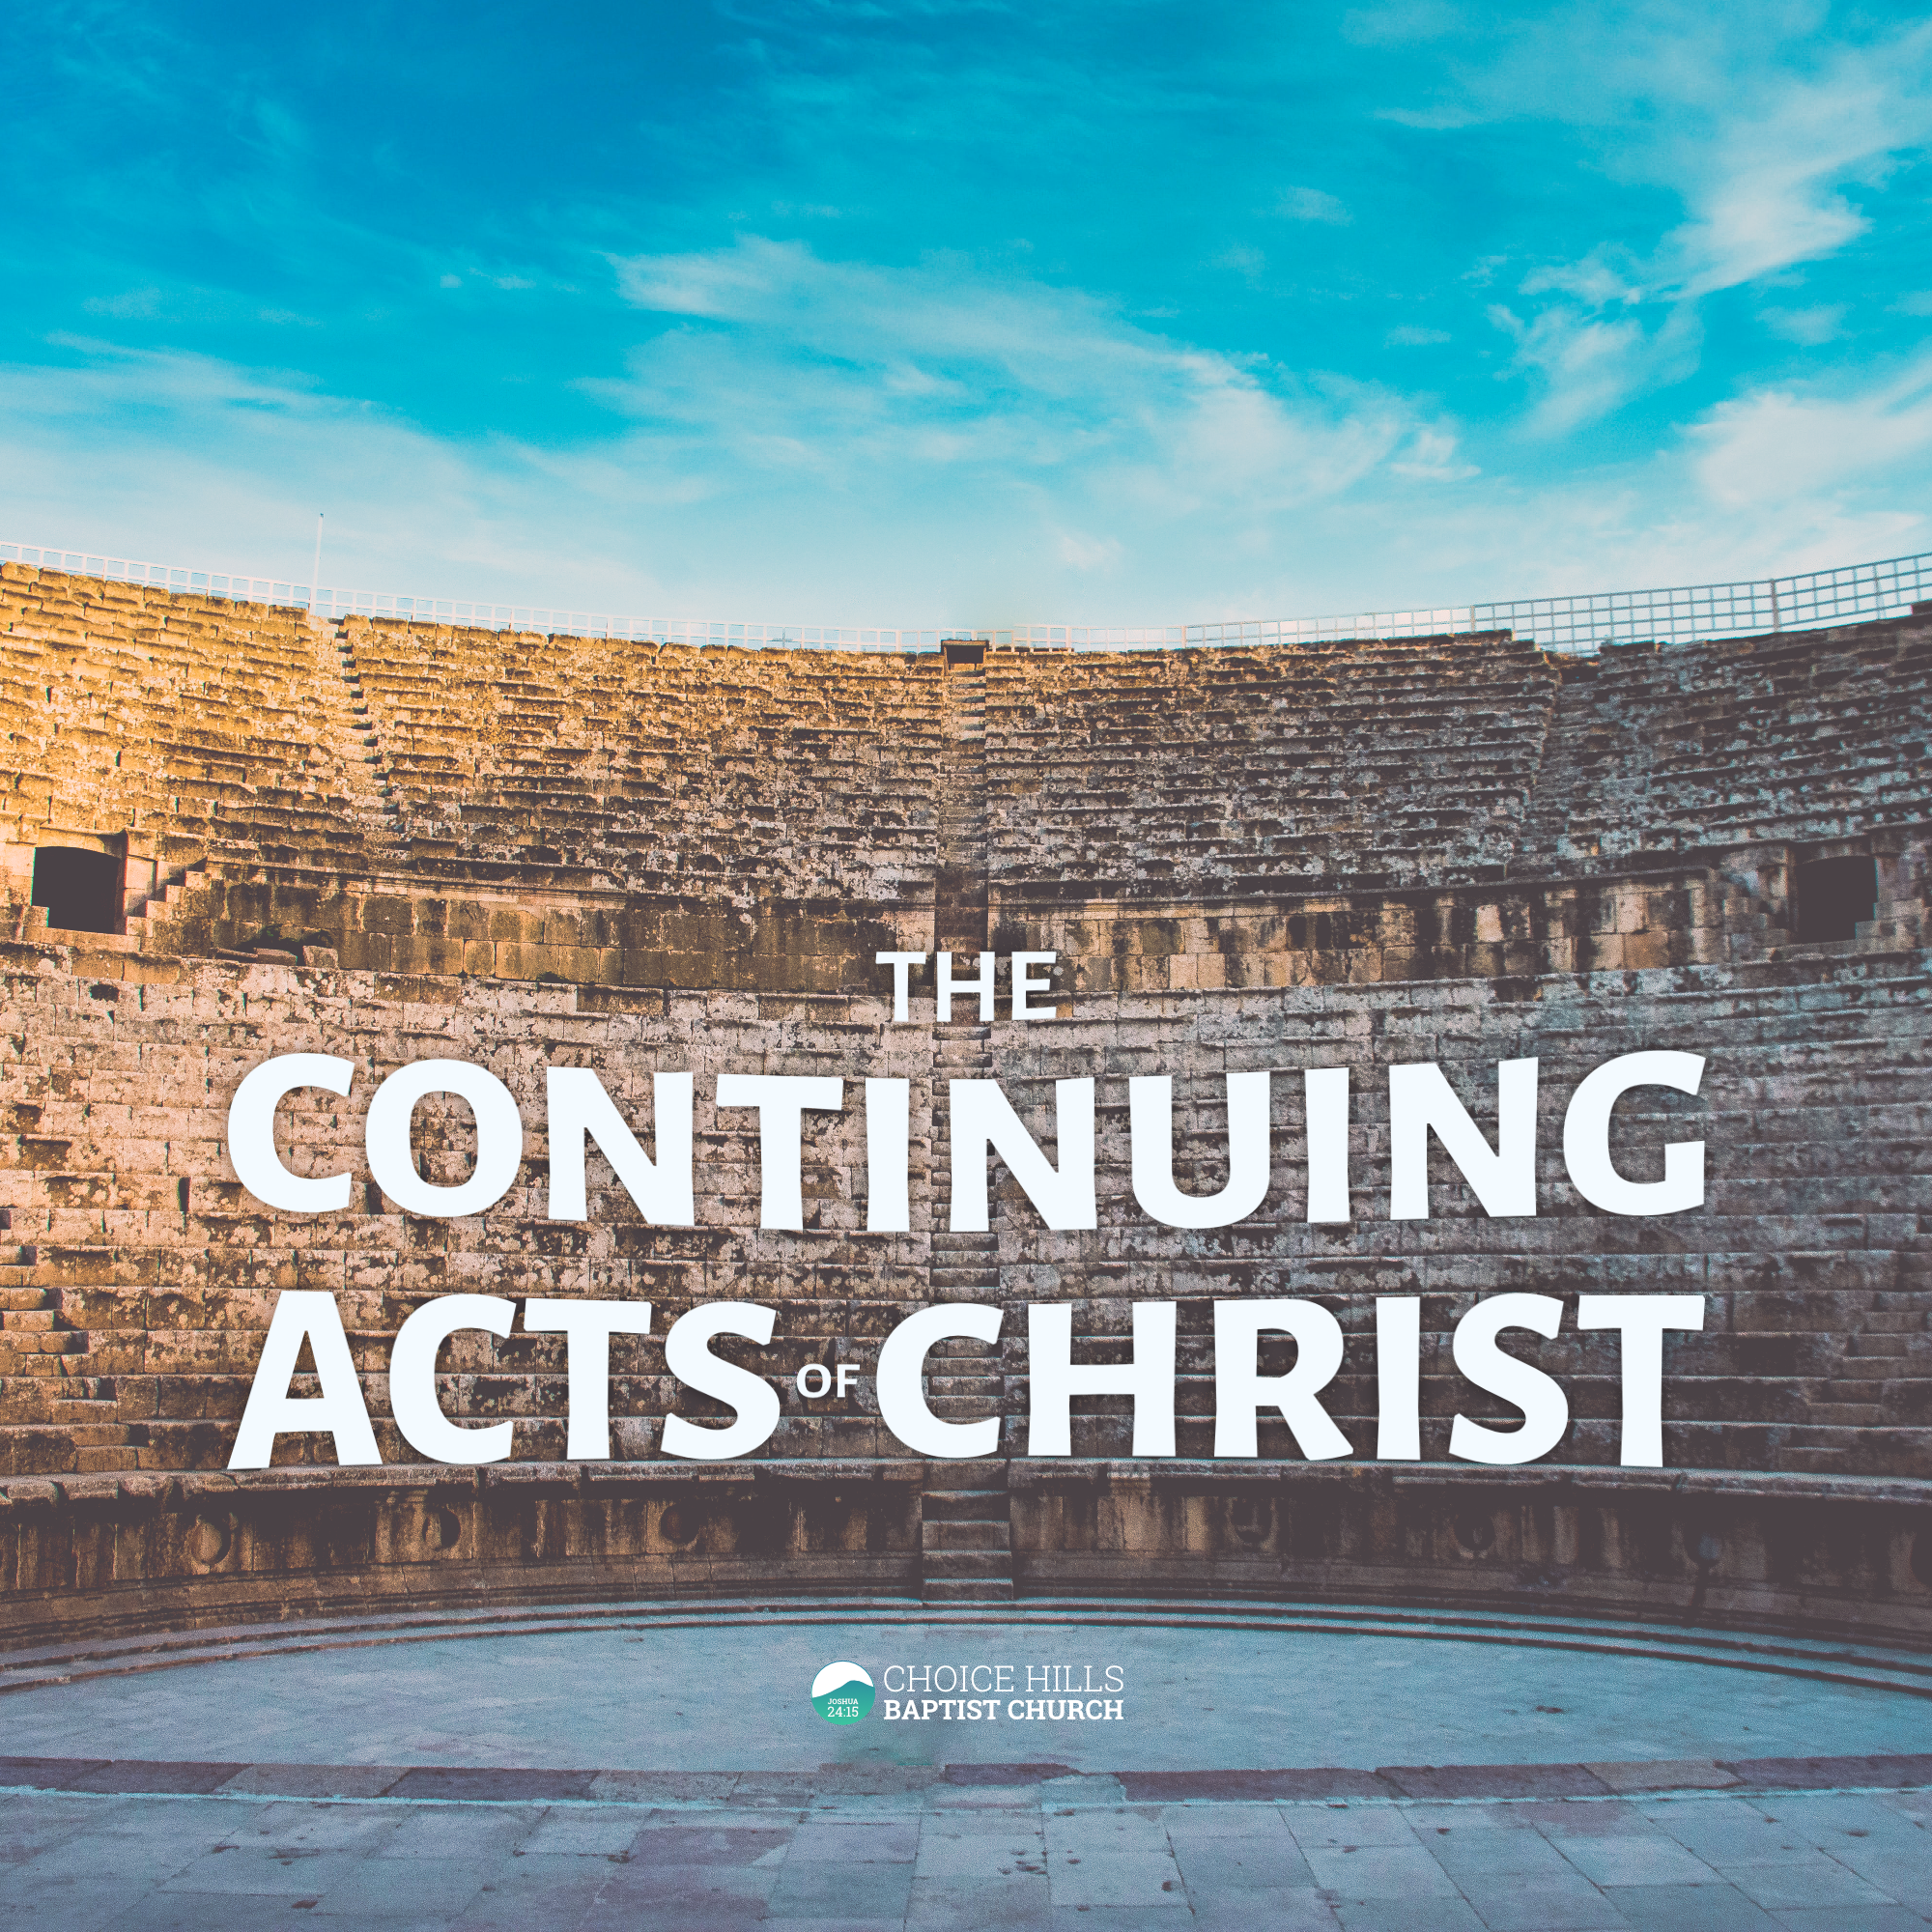 One Heart, One Soul, One Purse: The Continuing Acts of Christ—A Study of the Book of Acts